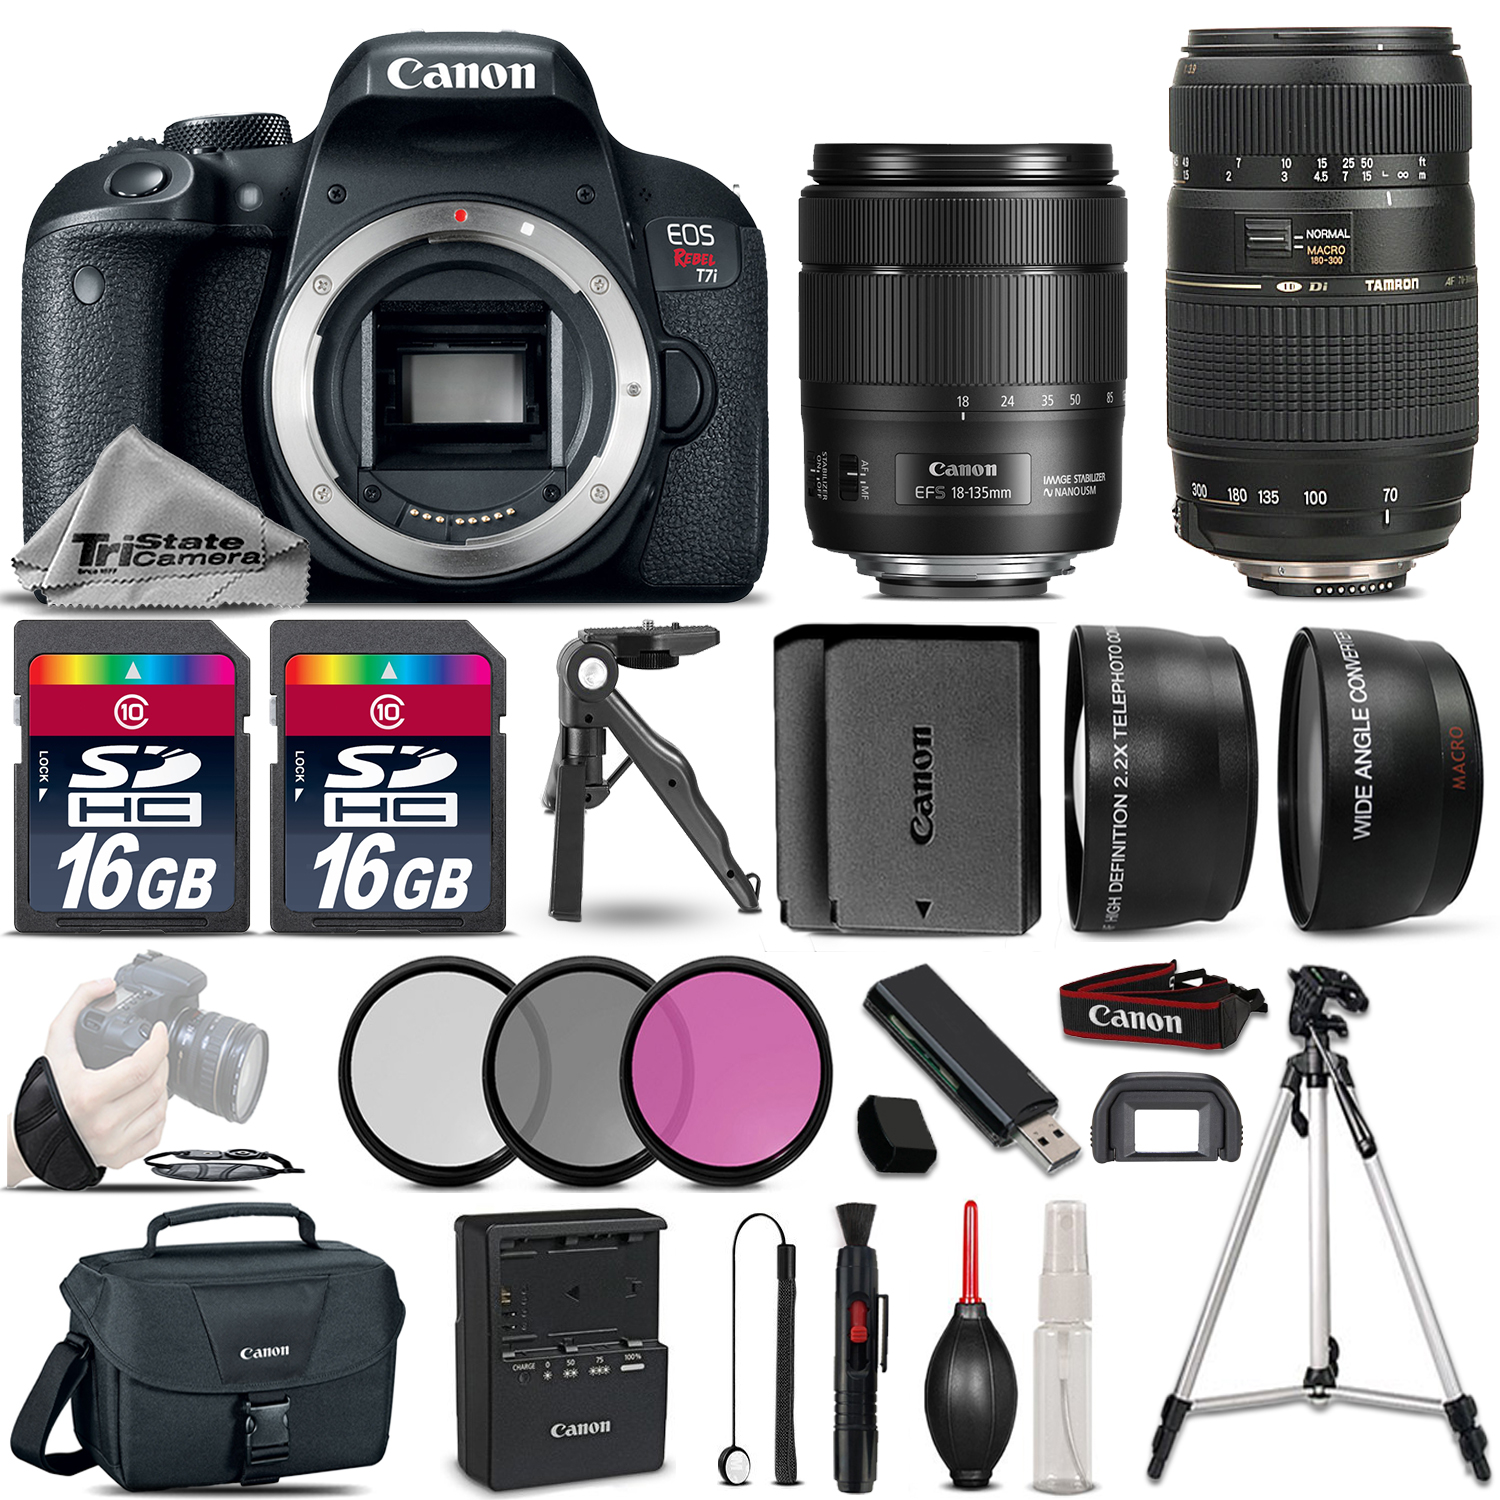 EOS Rebel T7i DSLR Camera  w/ 18-135mm USM and 70-300mm + Extra Battery *FREE SHIPPING*